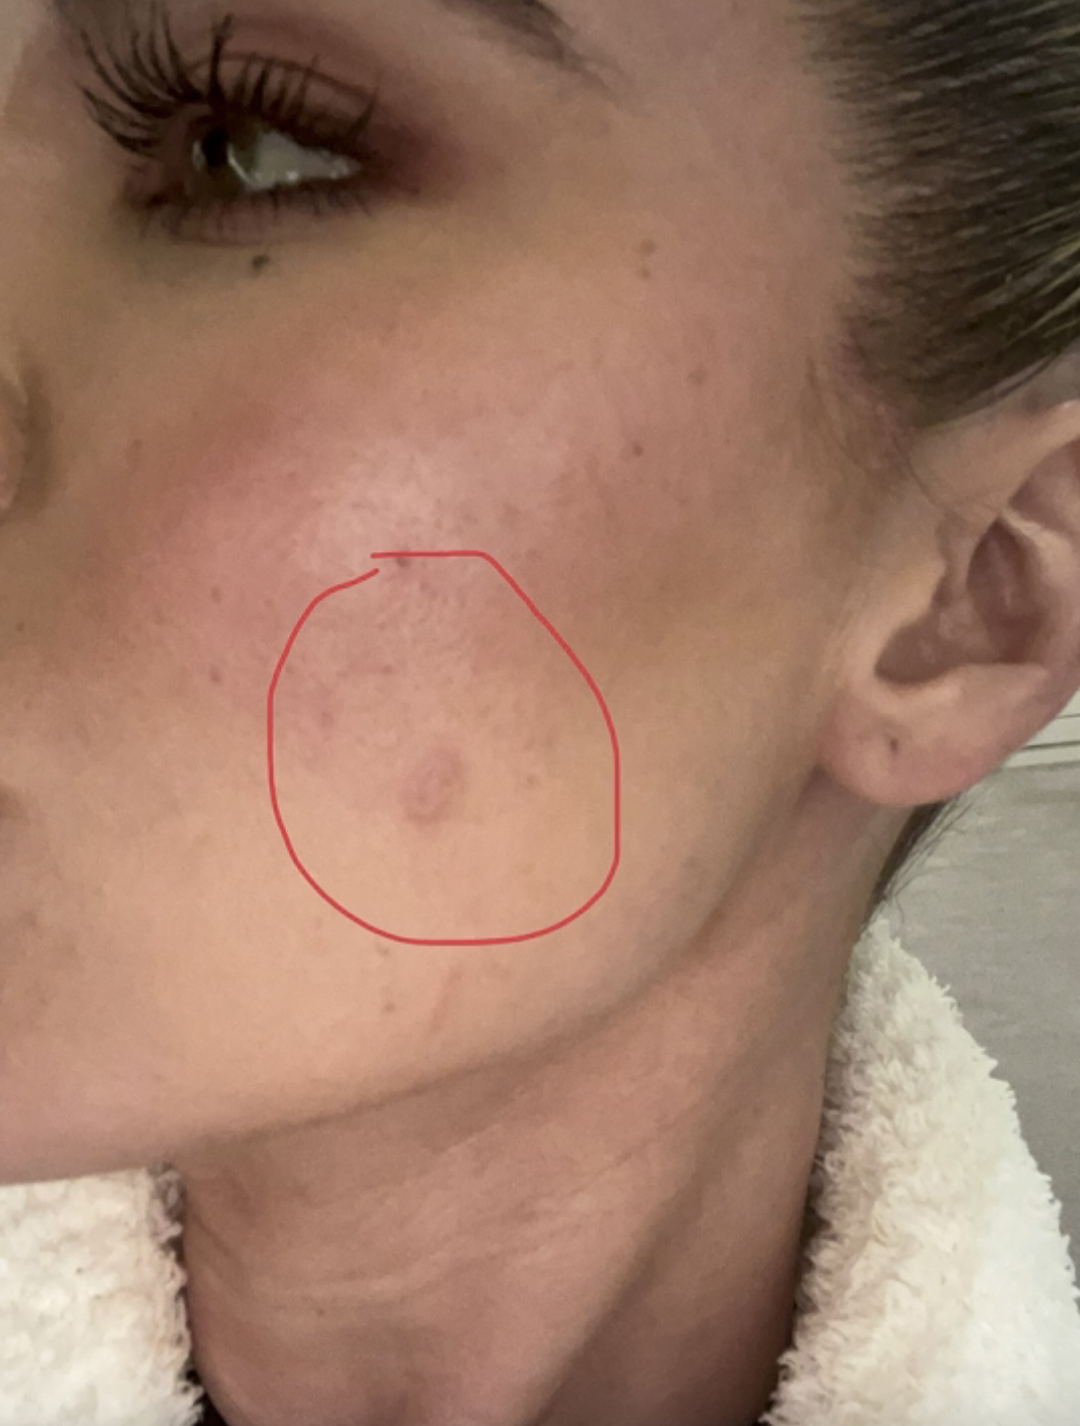 circle drawn around the spot on her face